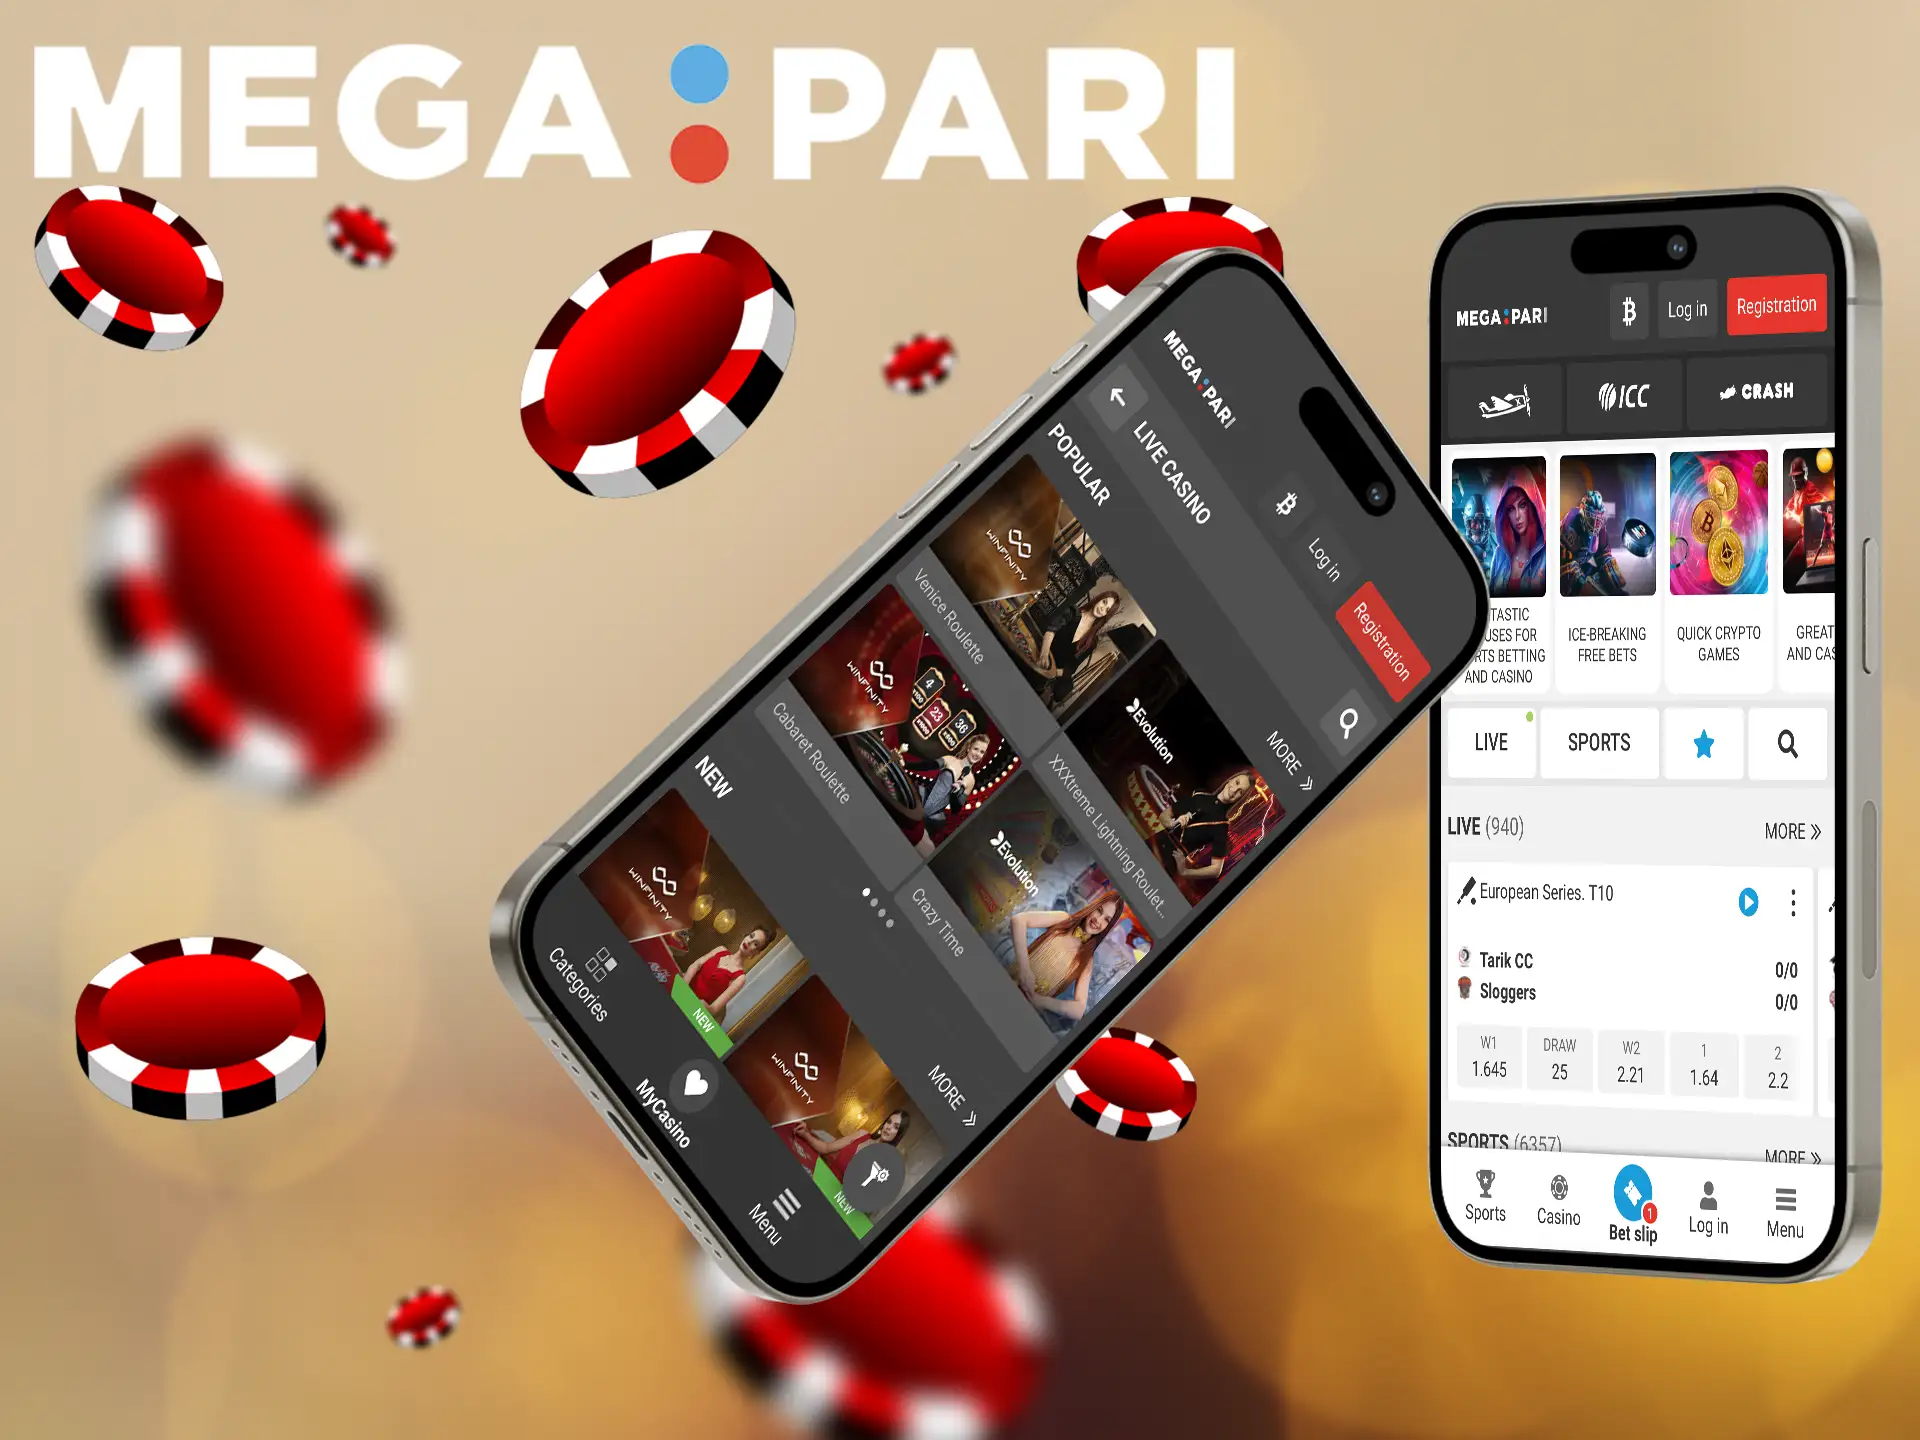 As you play, you will experience a new way of interacting with the MegaPari app thanks to its innovative interface.